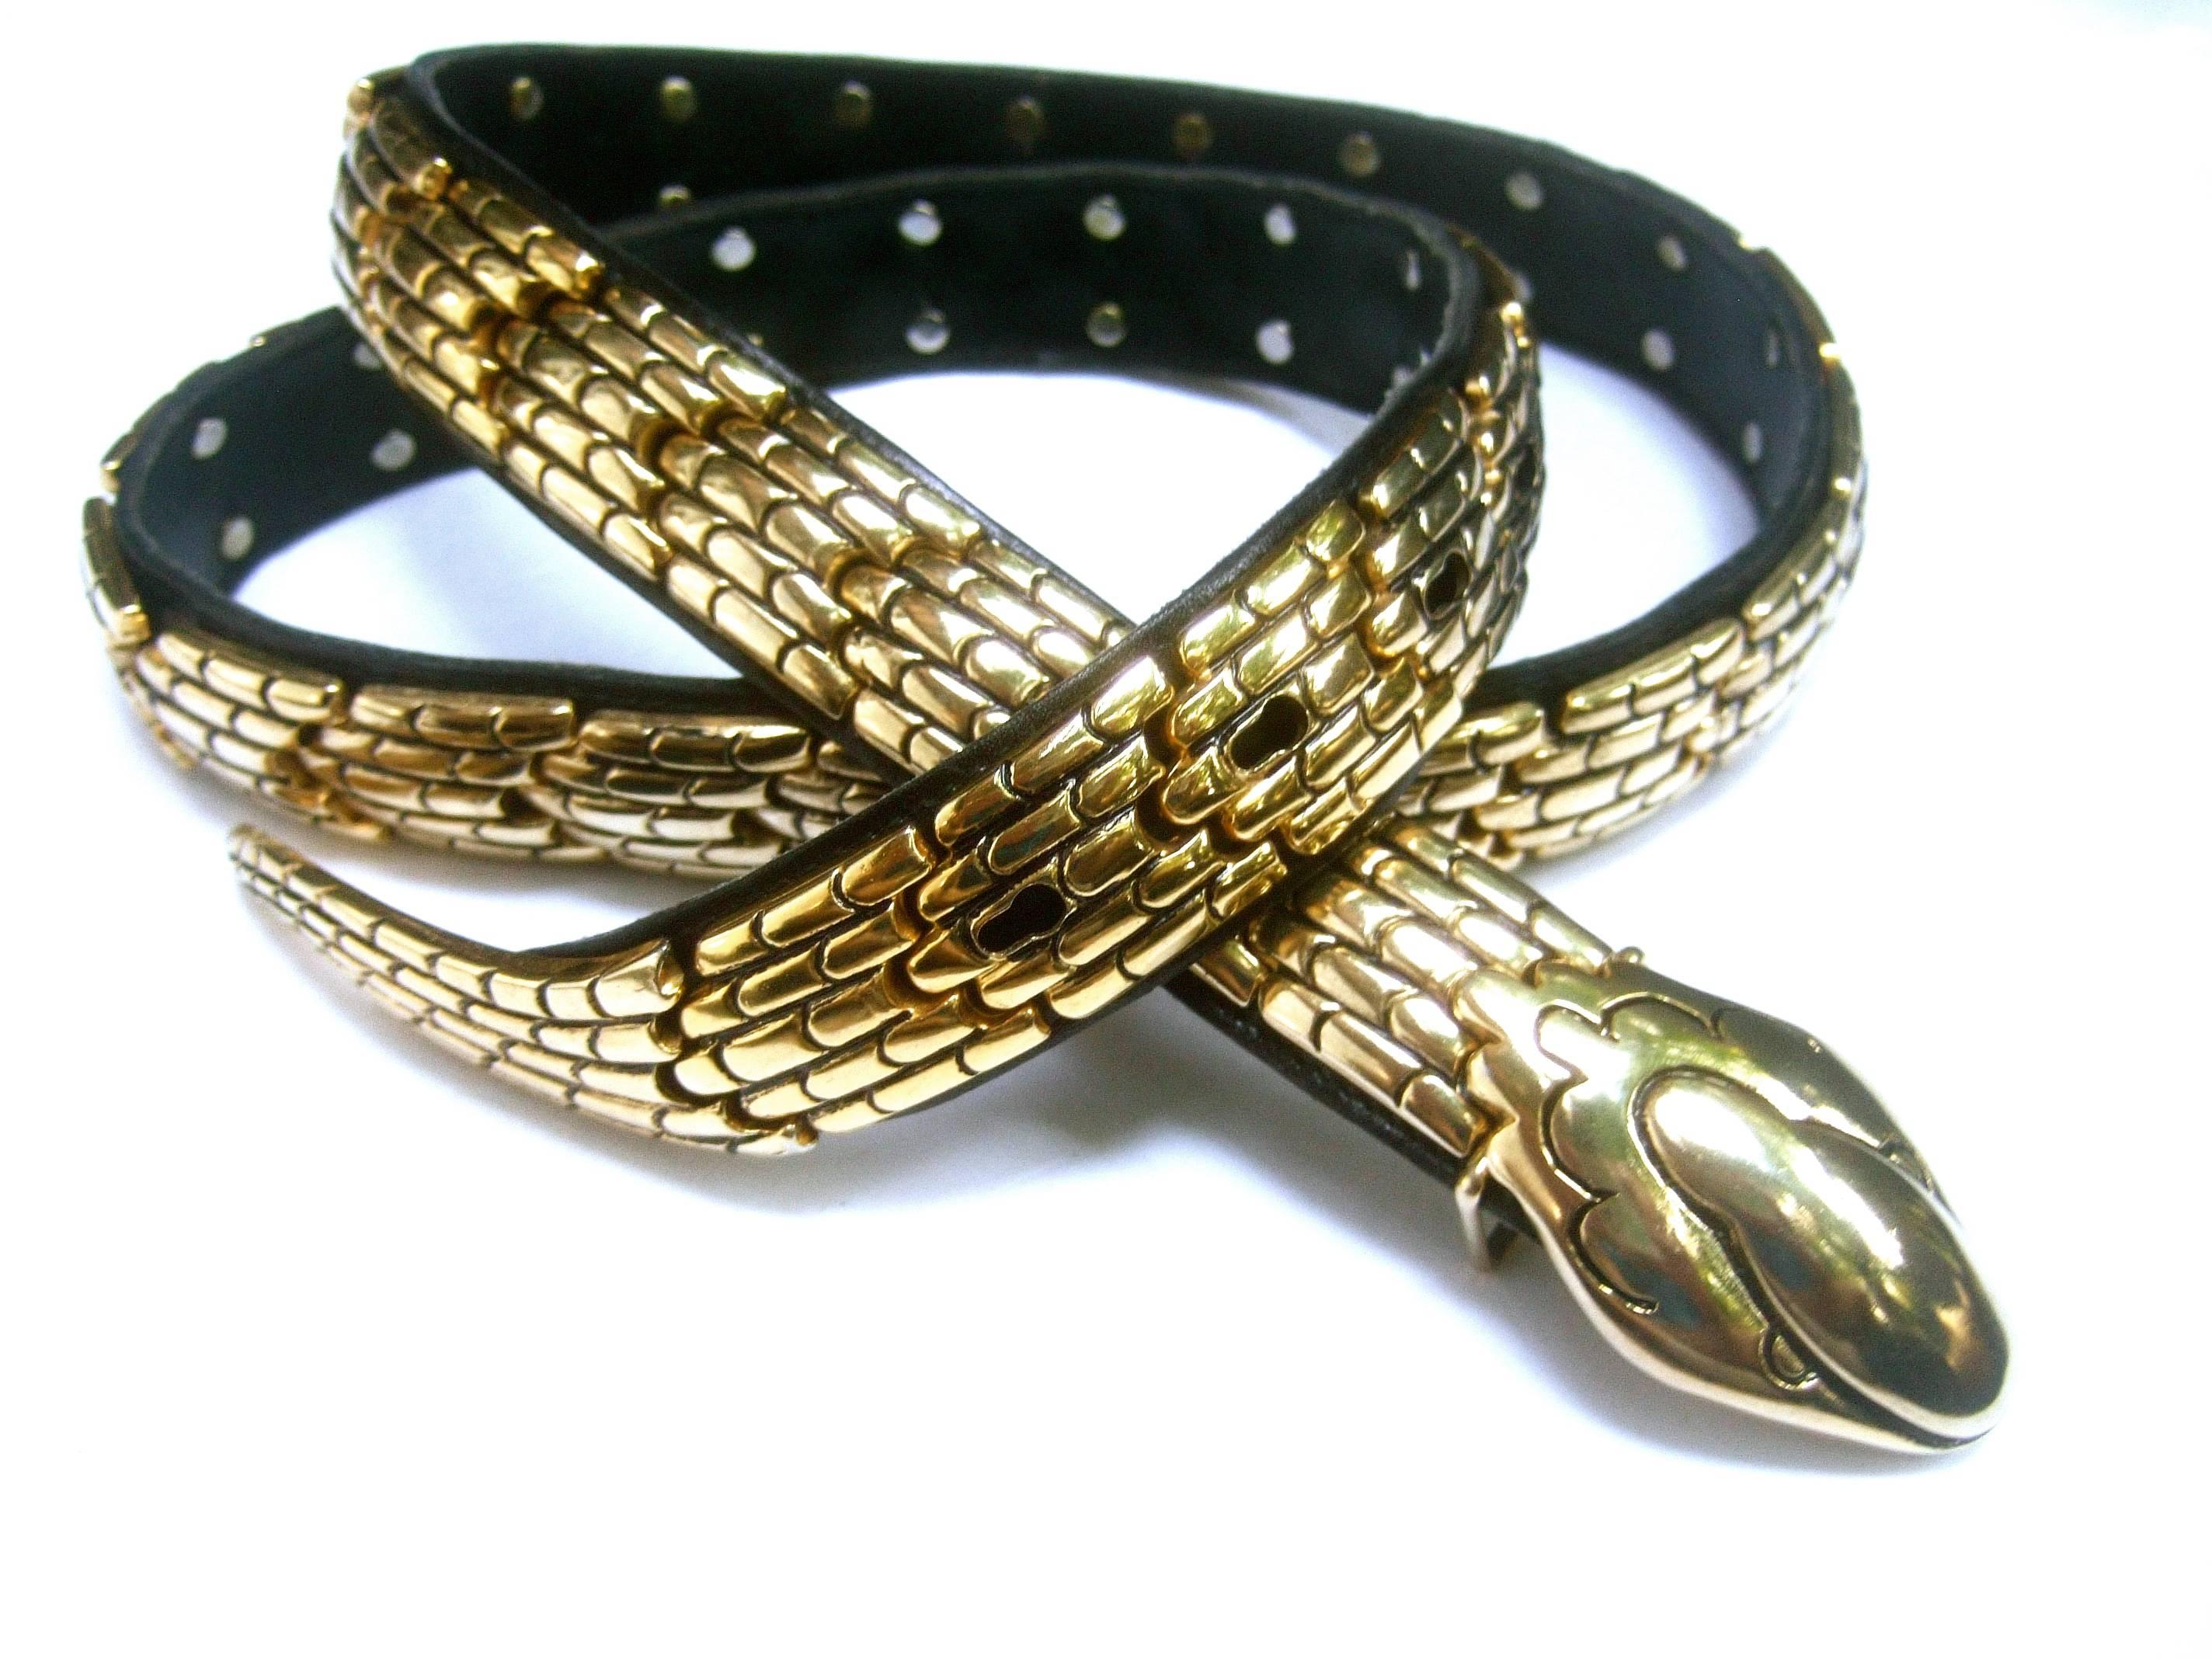 Avant-Garde Italian articulated gilt metal serpent belt
The unique belt is constructed with heavy gilt metal
links with impressed designs that emulate scales 

The series of gilt metal links are secured to a black 
leather belt. The buckle is